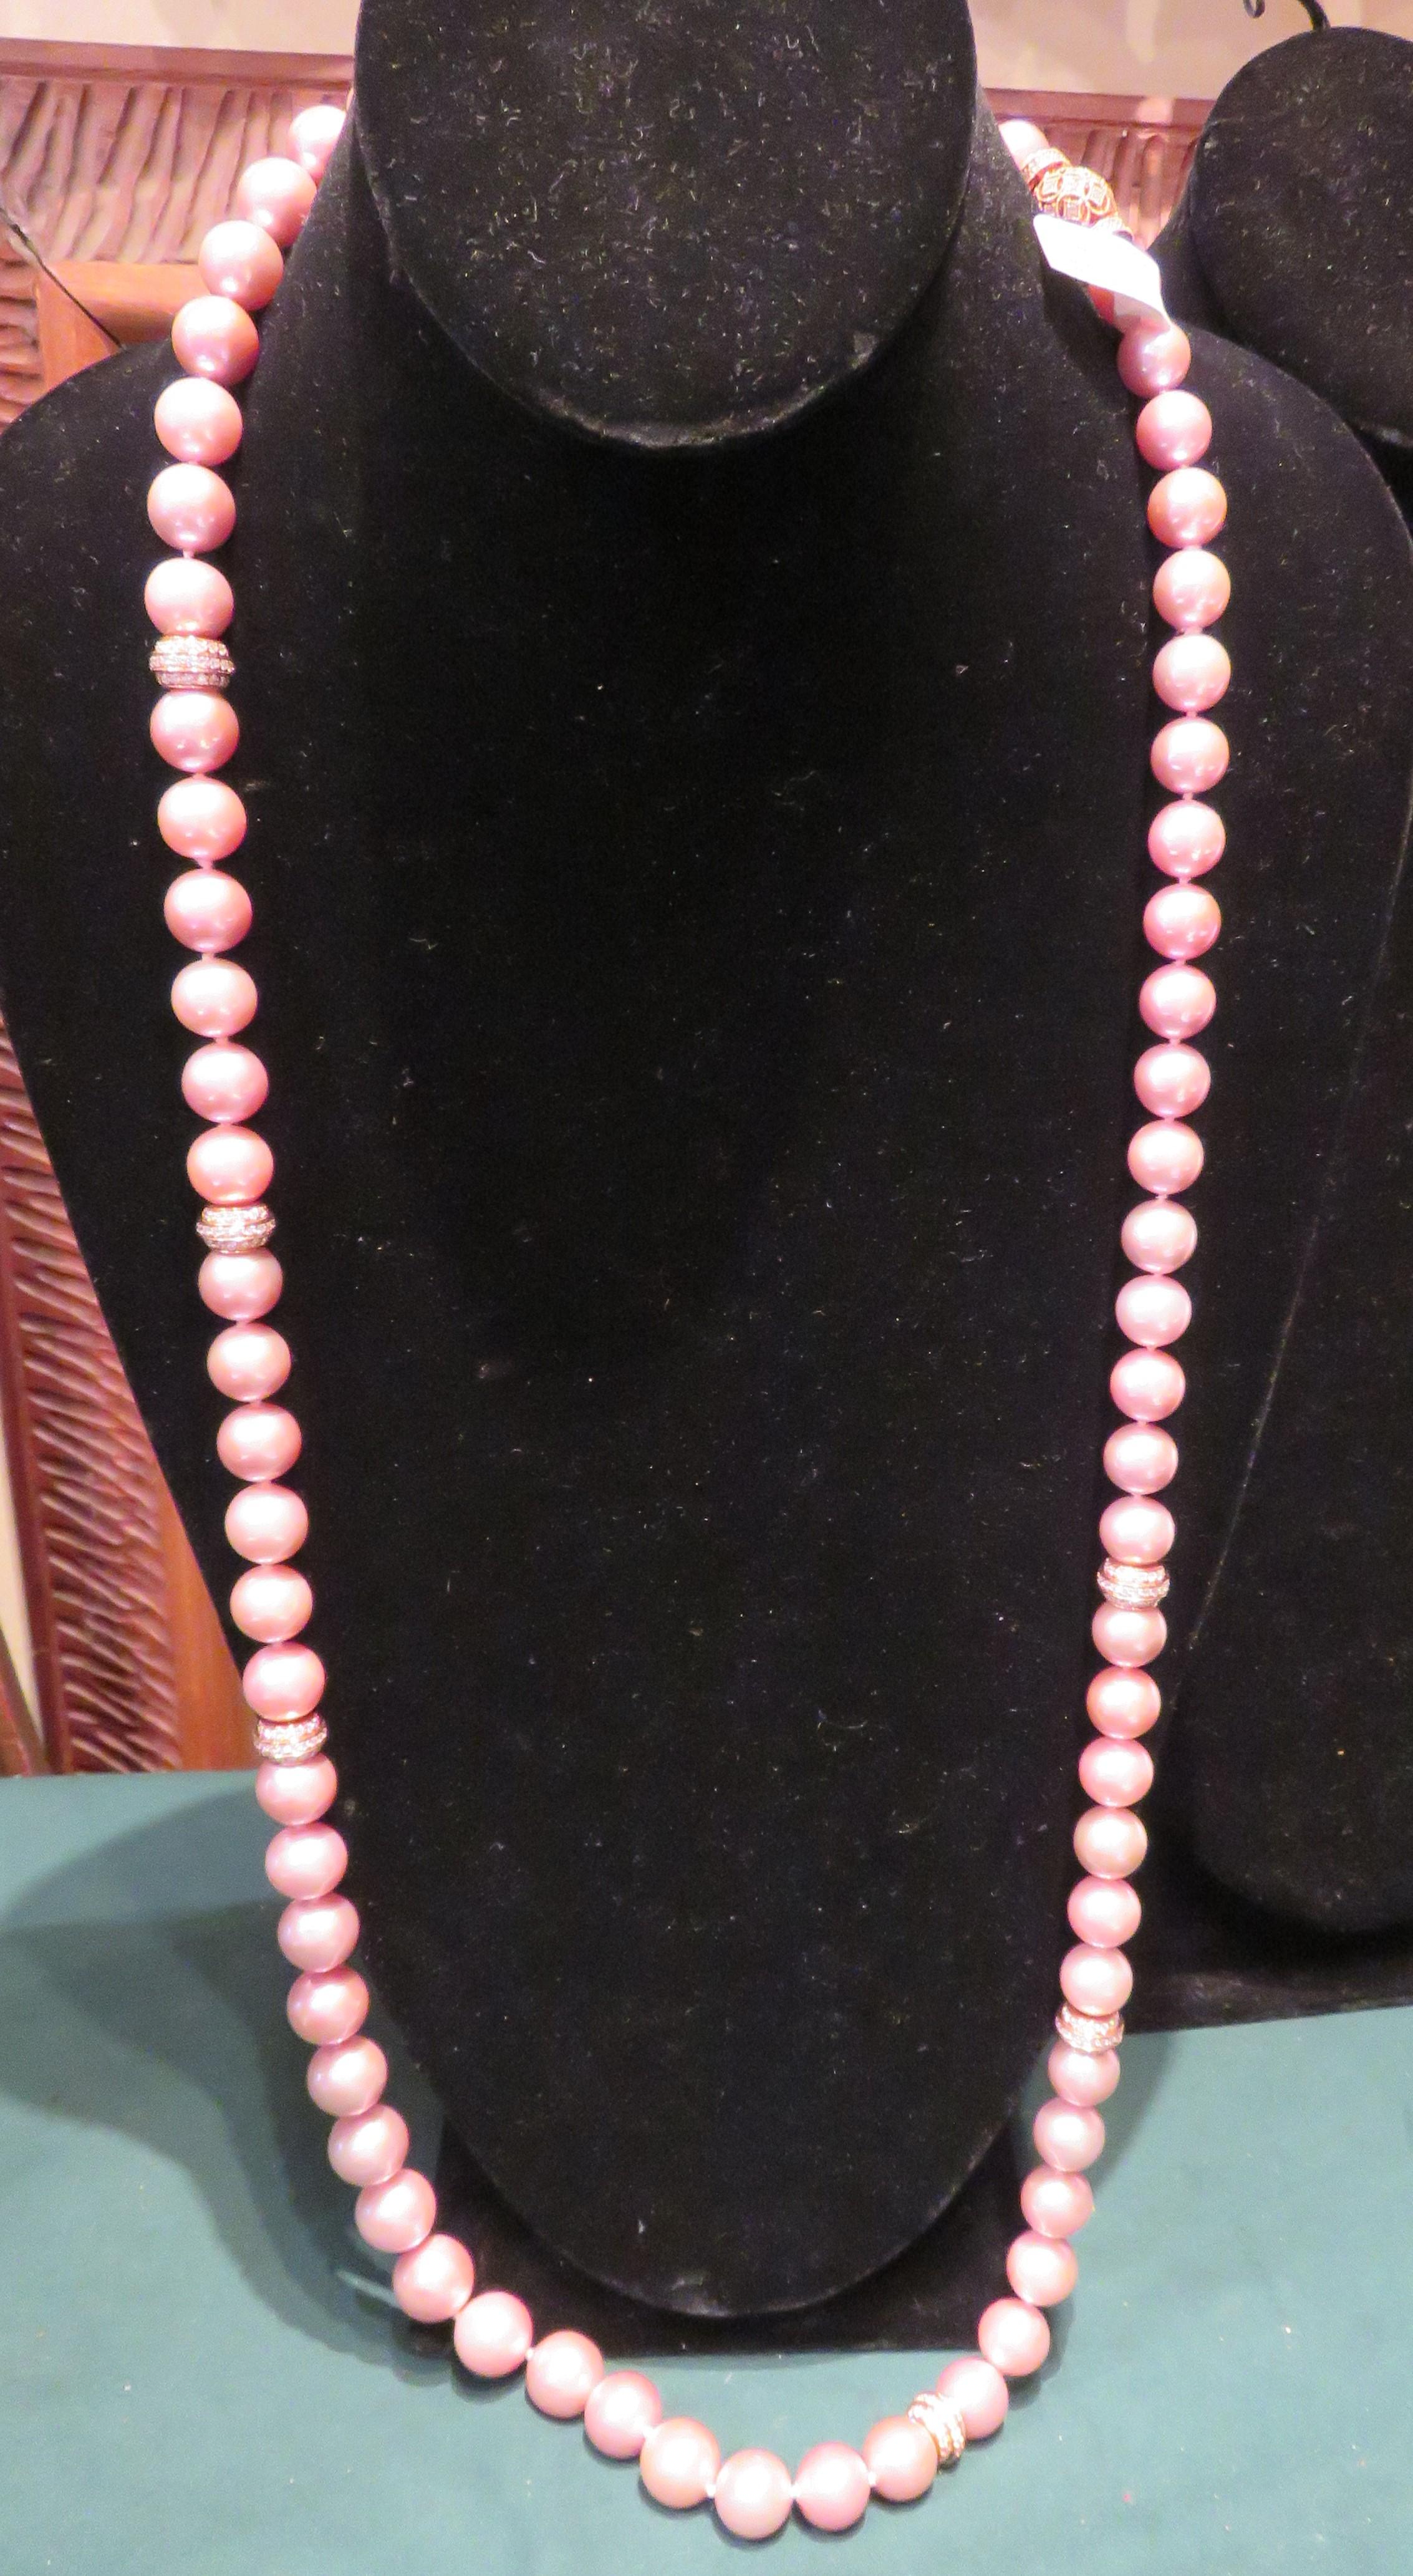 The Following Item we are offering is this Beautiful Rare Important 18KT White Gold Triple Strand South Sea Baroque Pearl and Diamond Necklace. Necklace is comprised of approx 73 Beautiful Magnificent High Luster Large Rare SOUTH SEA PINK PEARLS